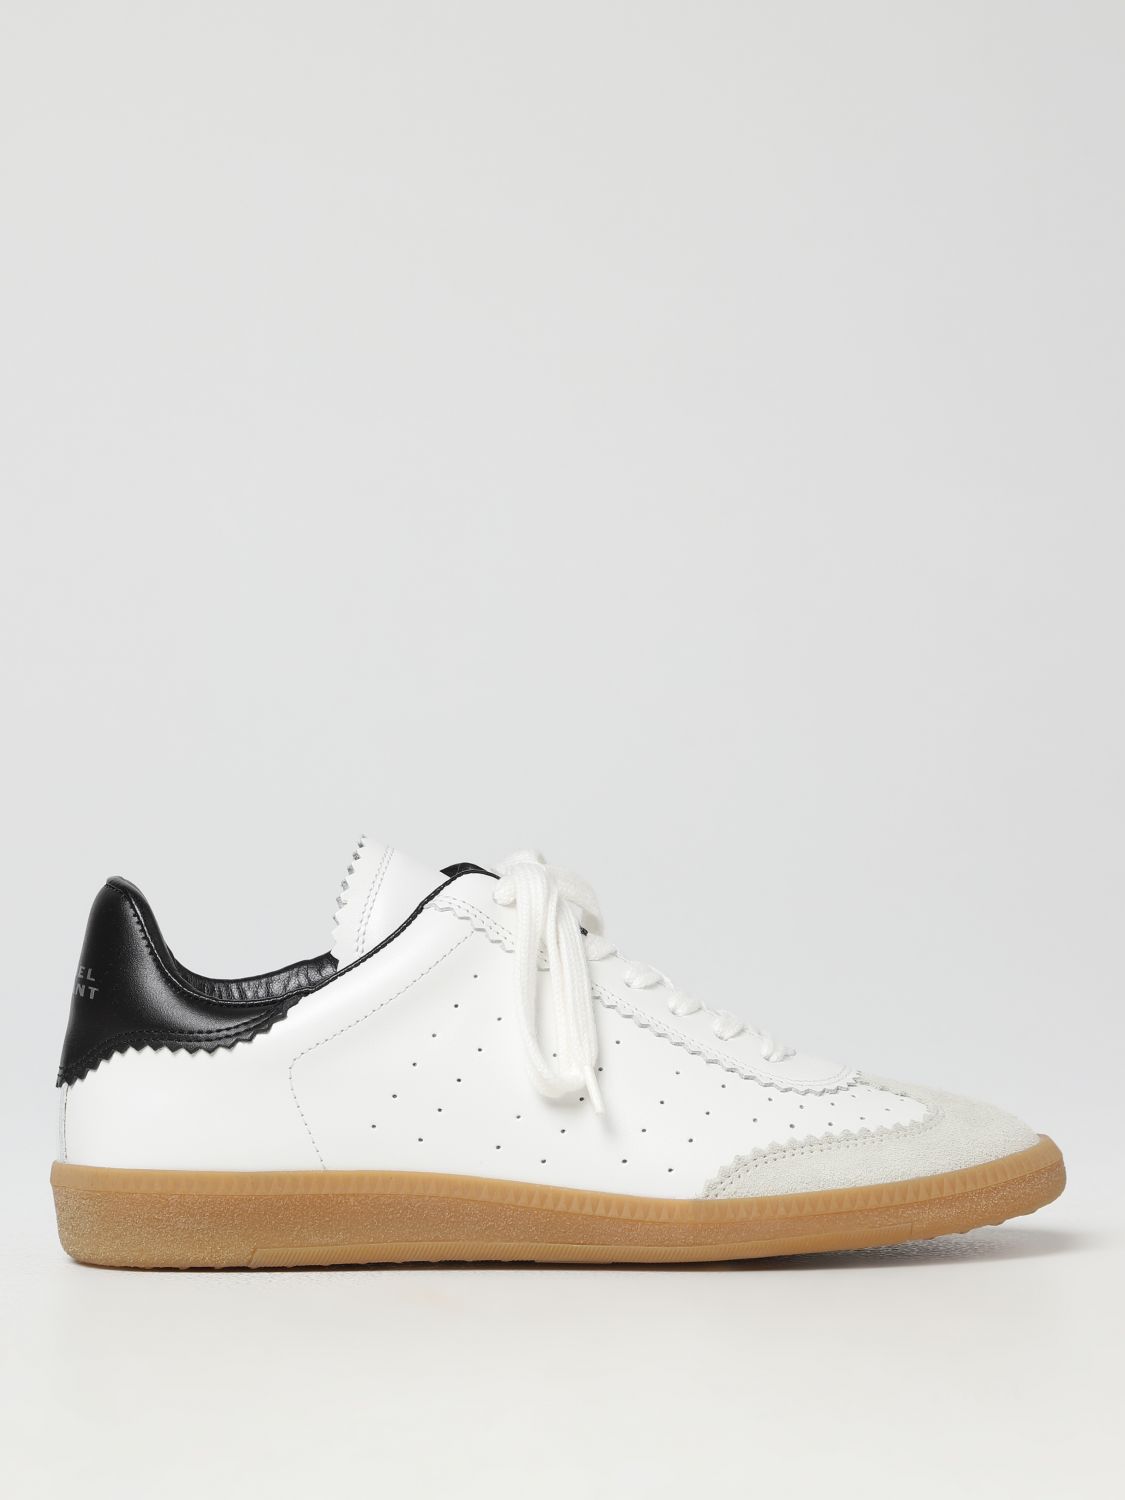 ISABEL MARANT: sneakers woman - White | Isabel Marant sneakers BK0014FAA1E21S at